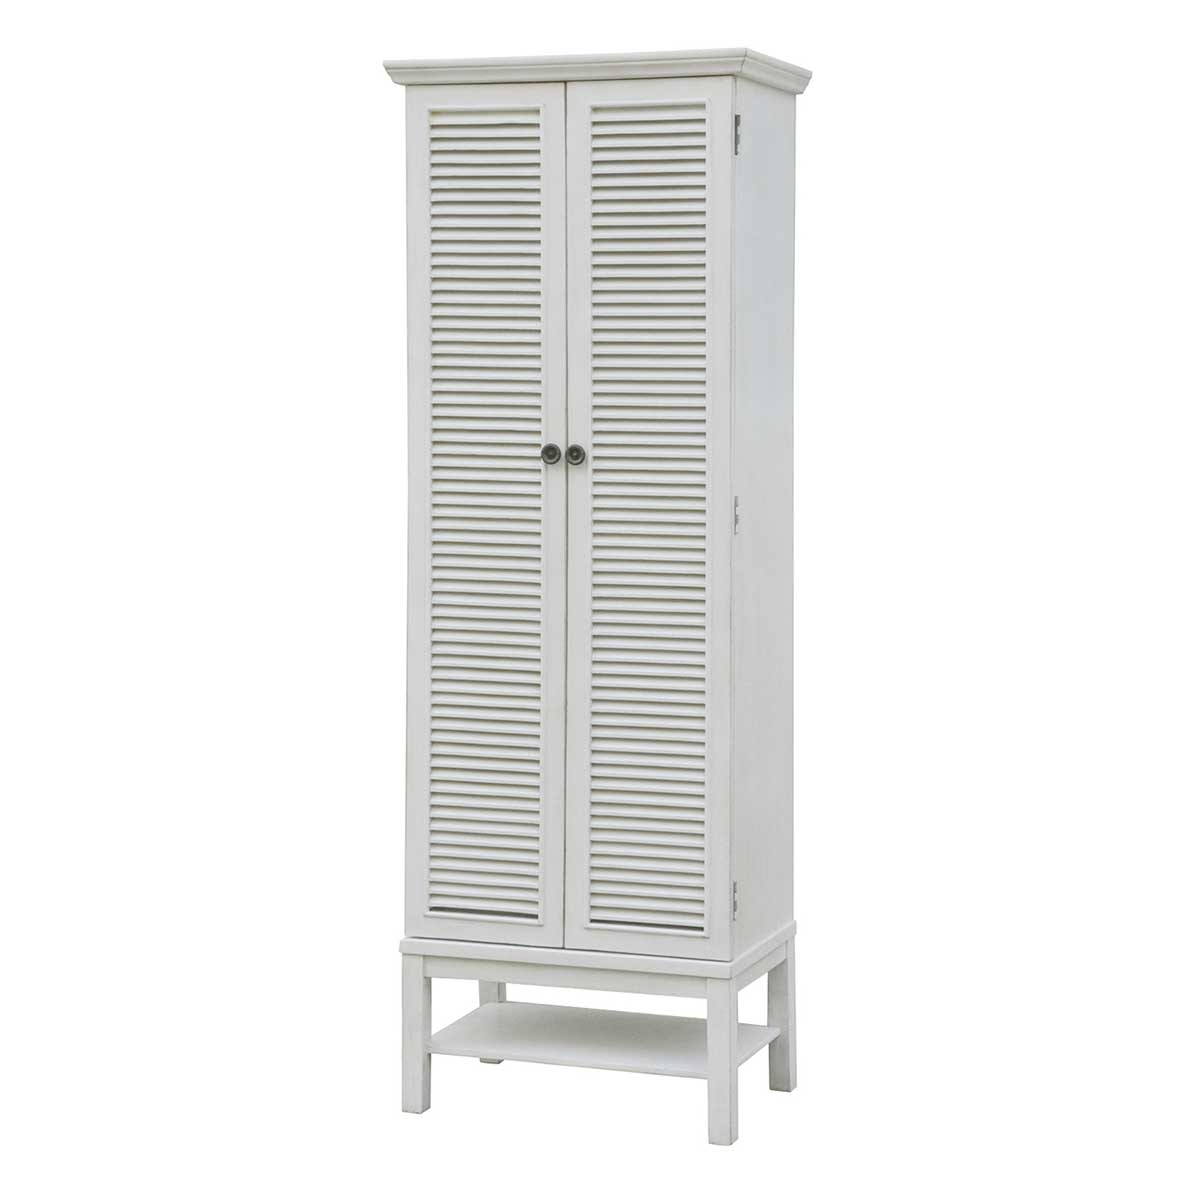 Crestview Collection Magnolia Louvered 2 Door Tall White Storage Cabinet